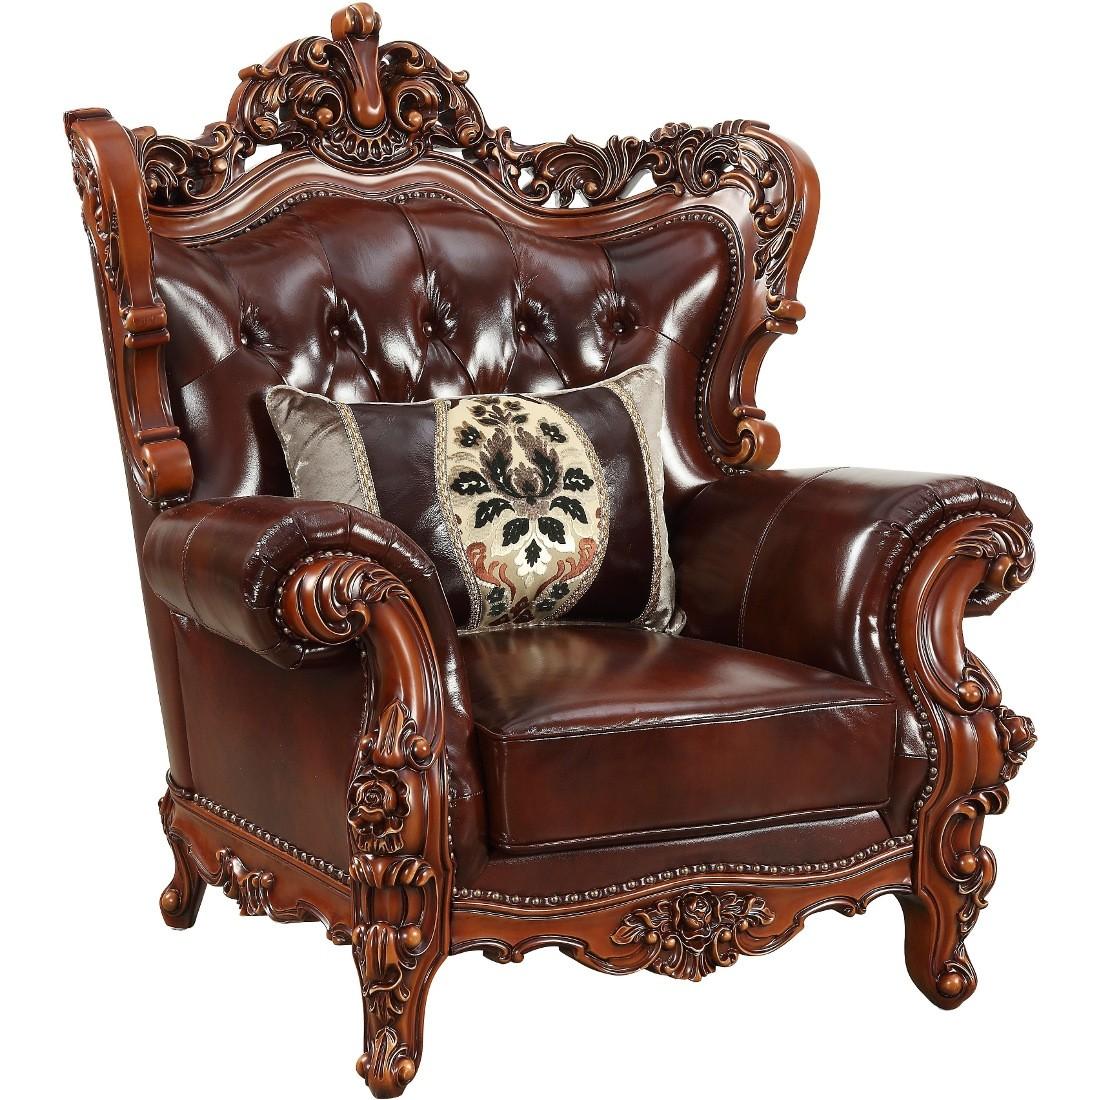 Classic, Traditional Armchair Eustoma-53067 Eustoma-53067 in Cherry, Walnut Top grain leather